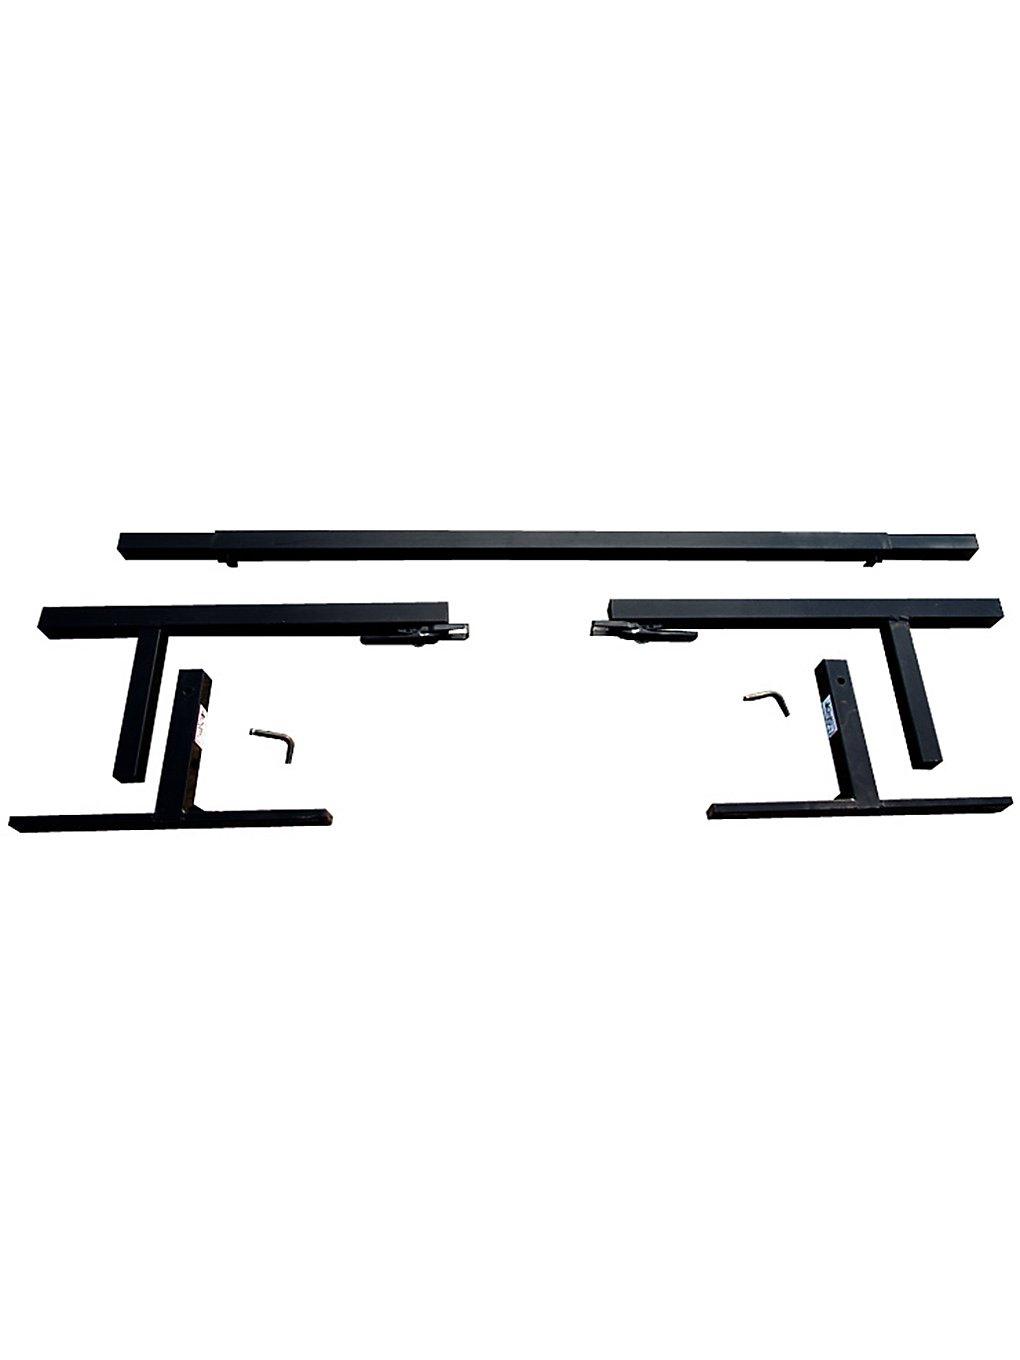 Flat Spot Rail To Go + Straight Extension Skate Obstacle schwarz